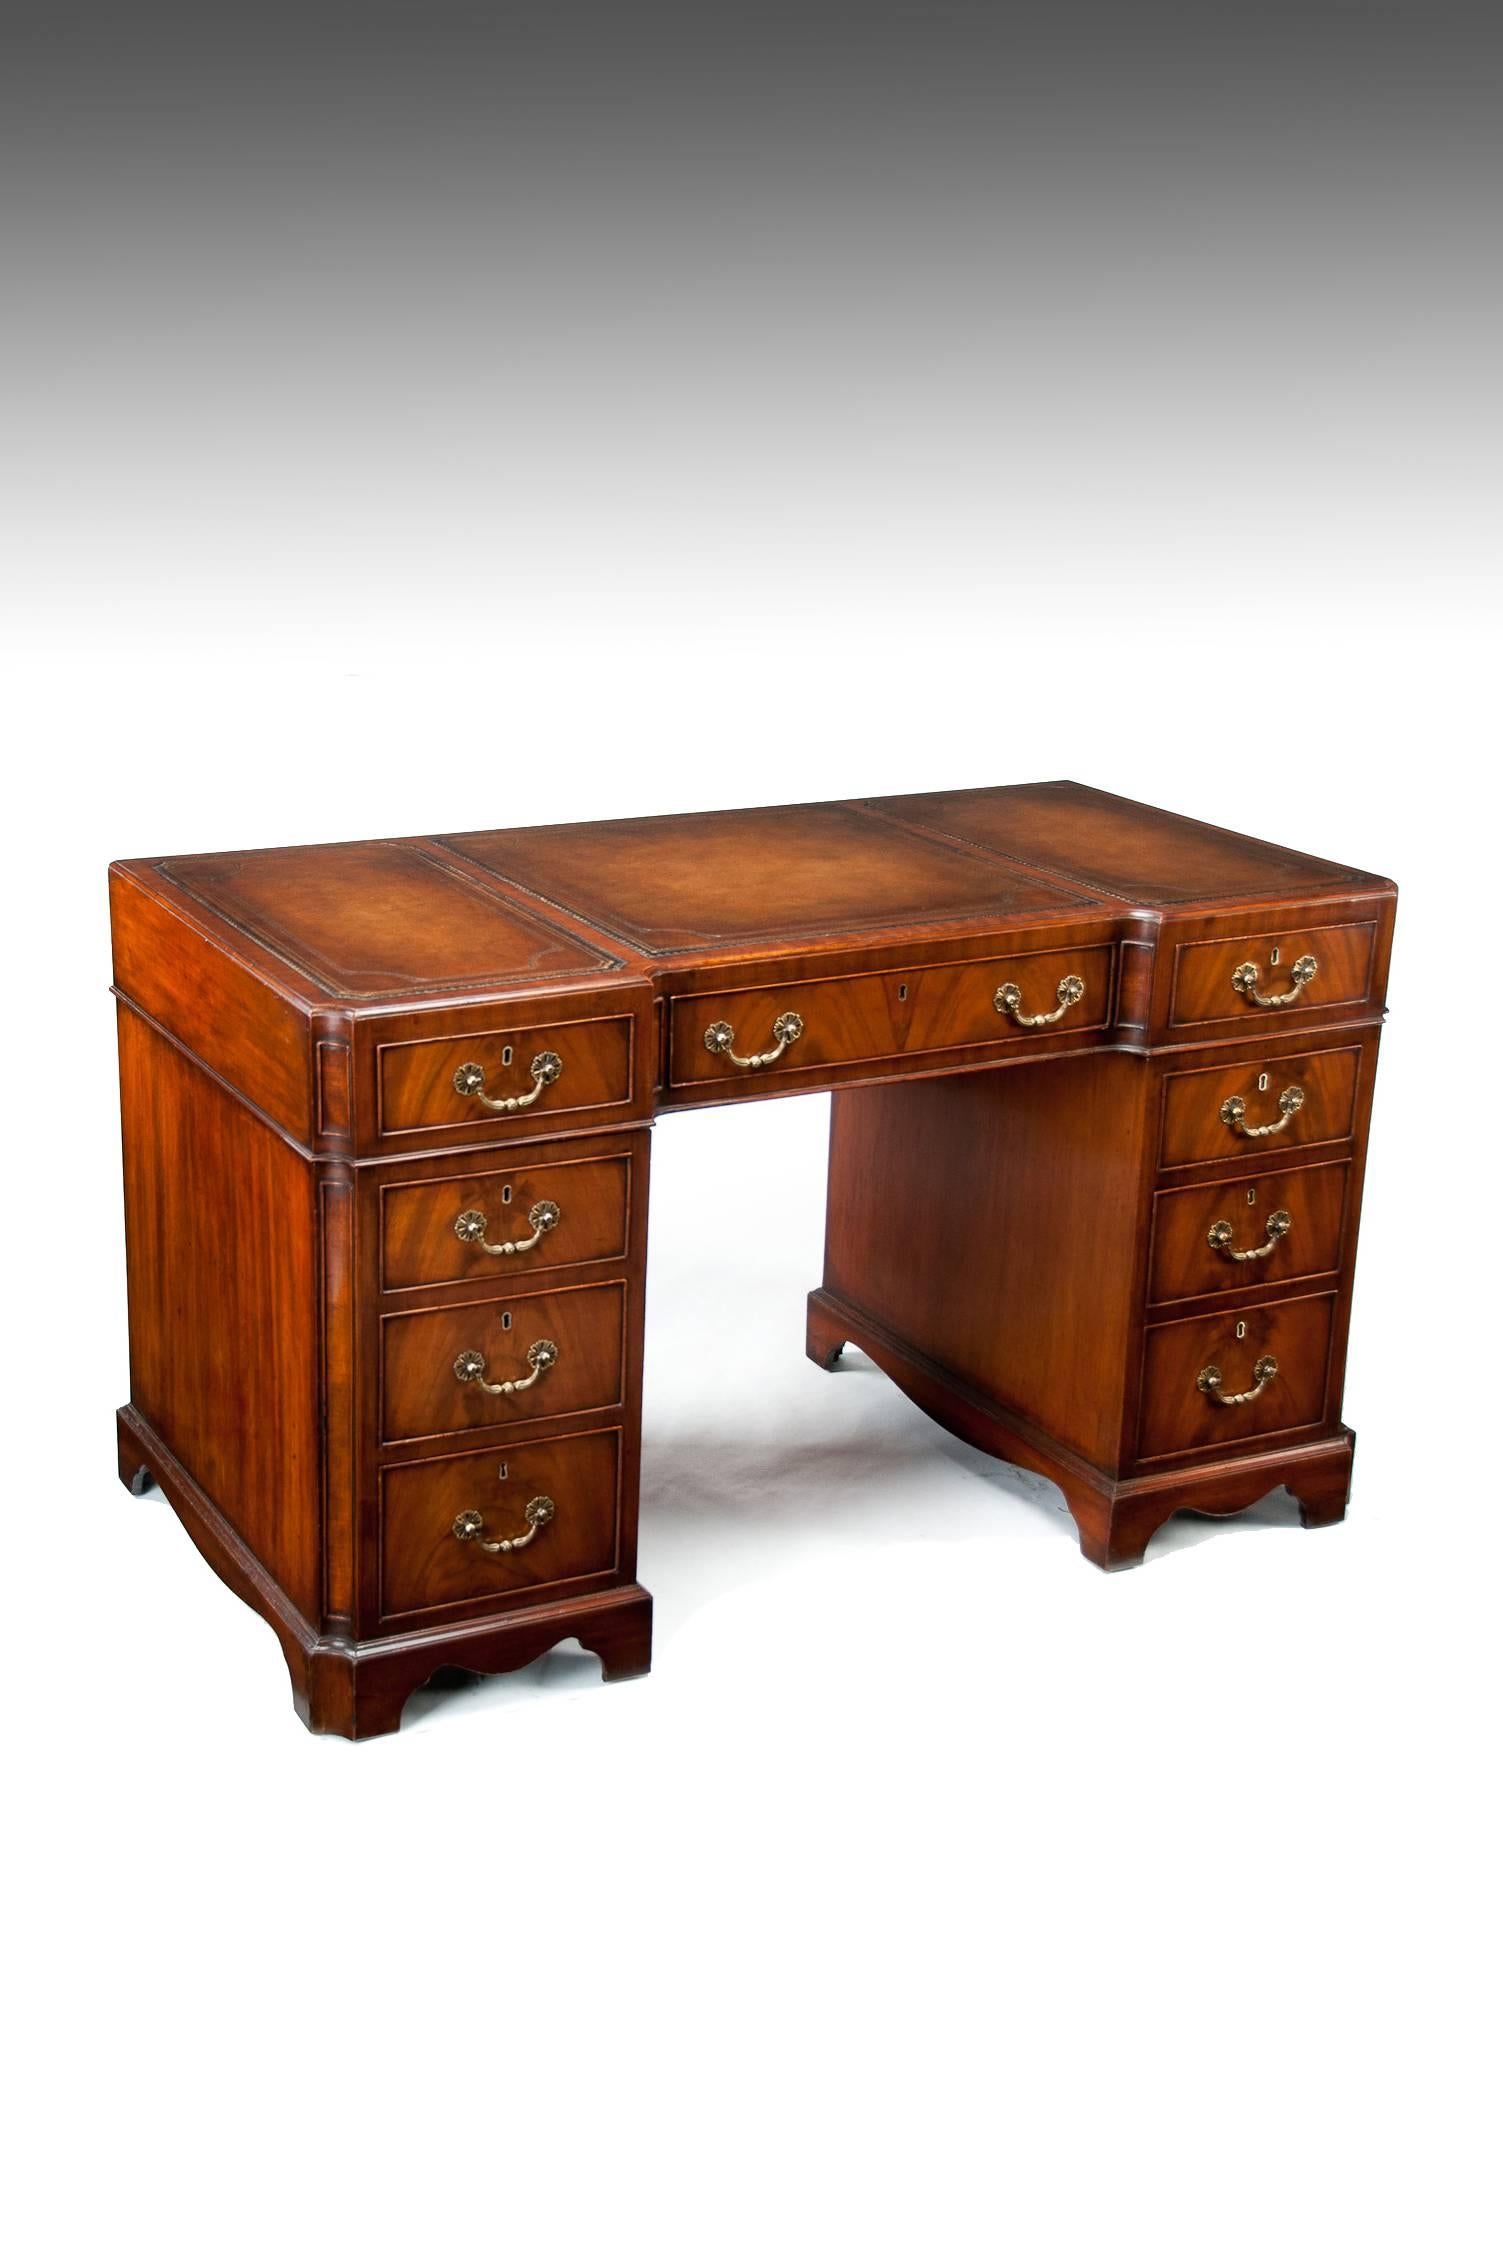 A superb quality Edwardian inverted breakfront mahogany pedestal writing desk with concave corners and gilt tooled leather inserts, circa 1900.
This fine quality mahogany desk has been made in the early Georgian style having fully oak lined drawers